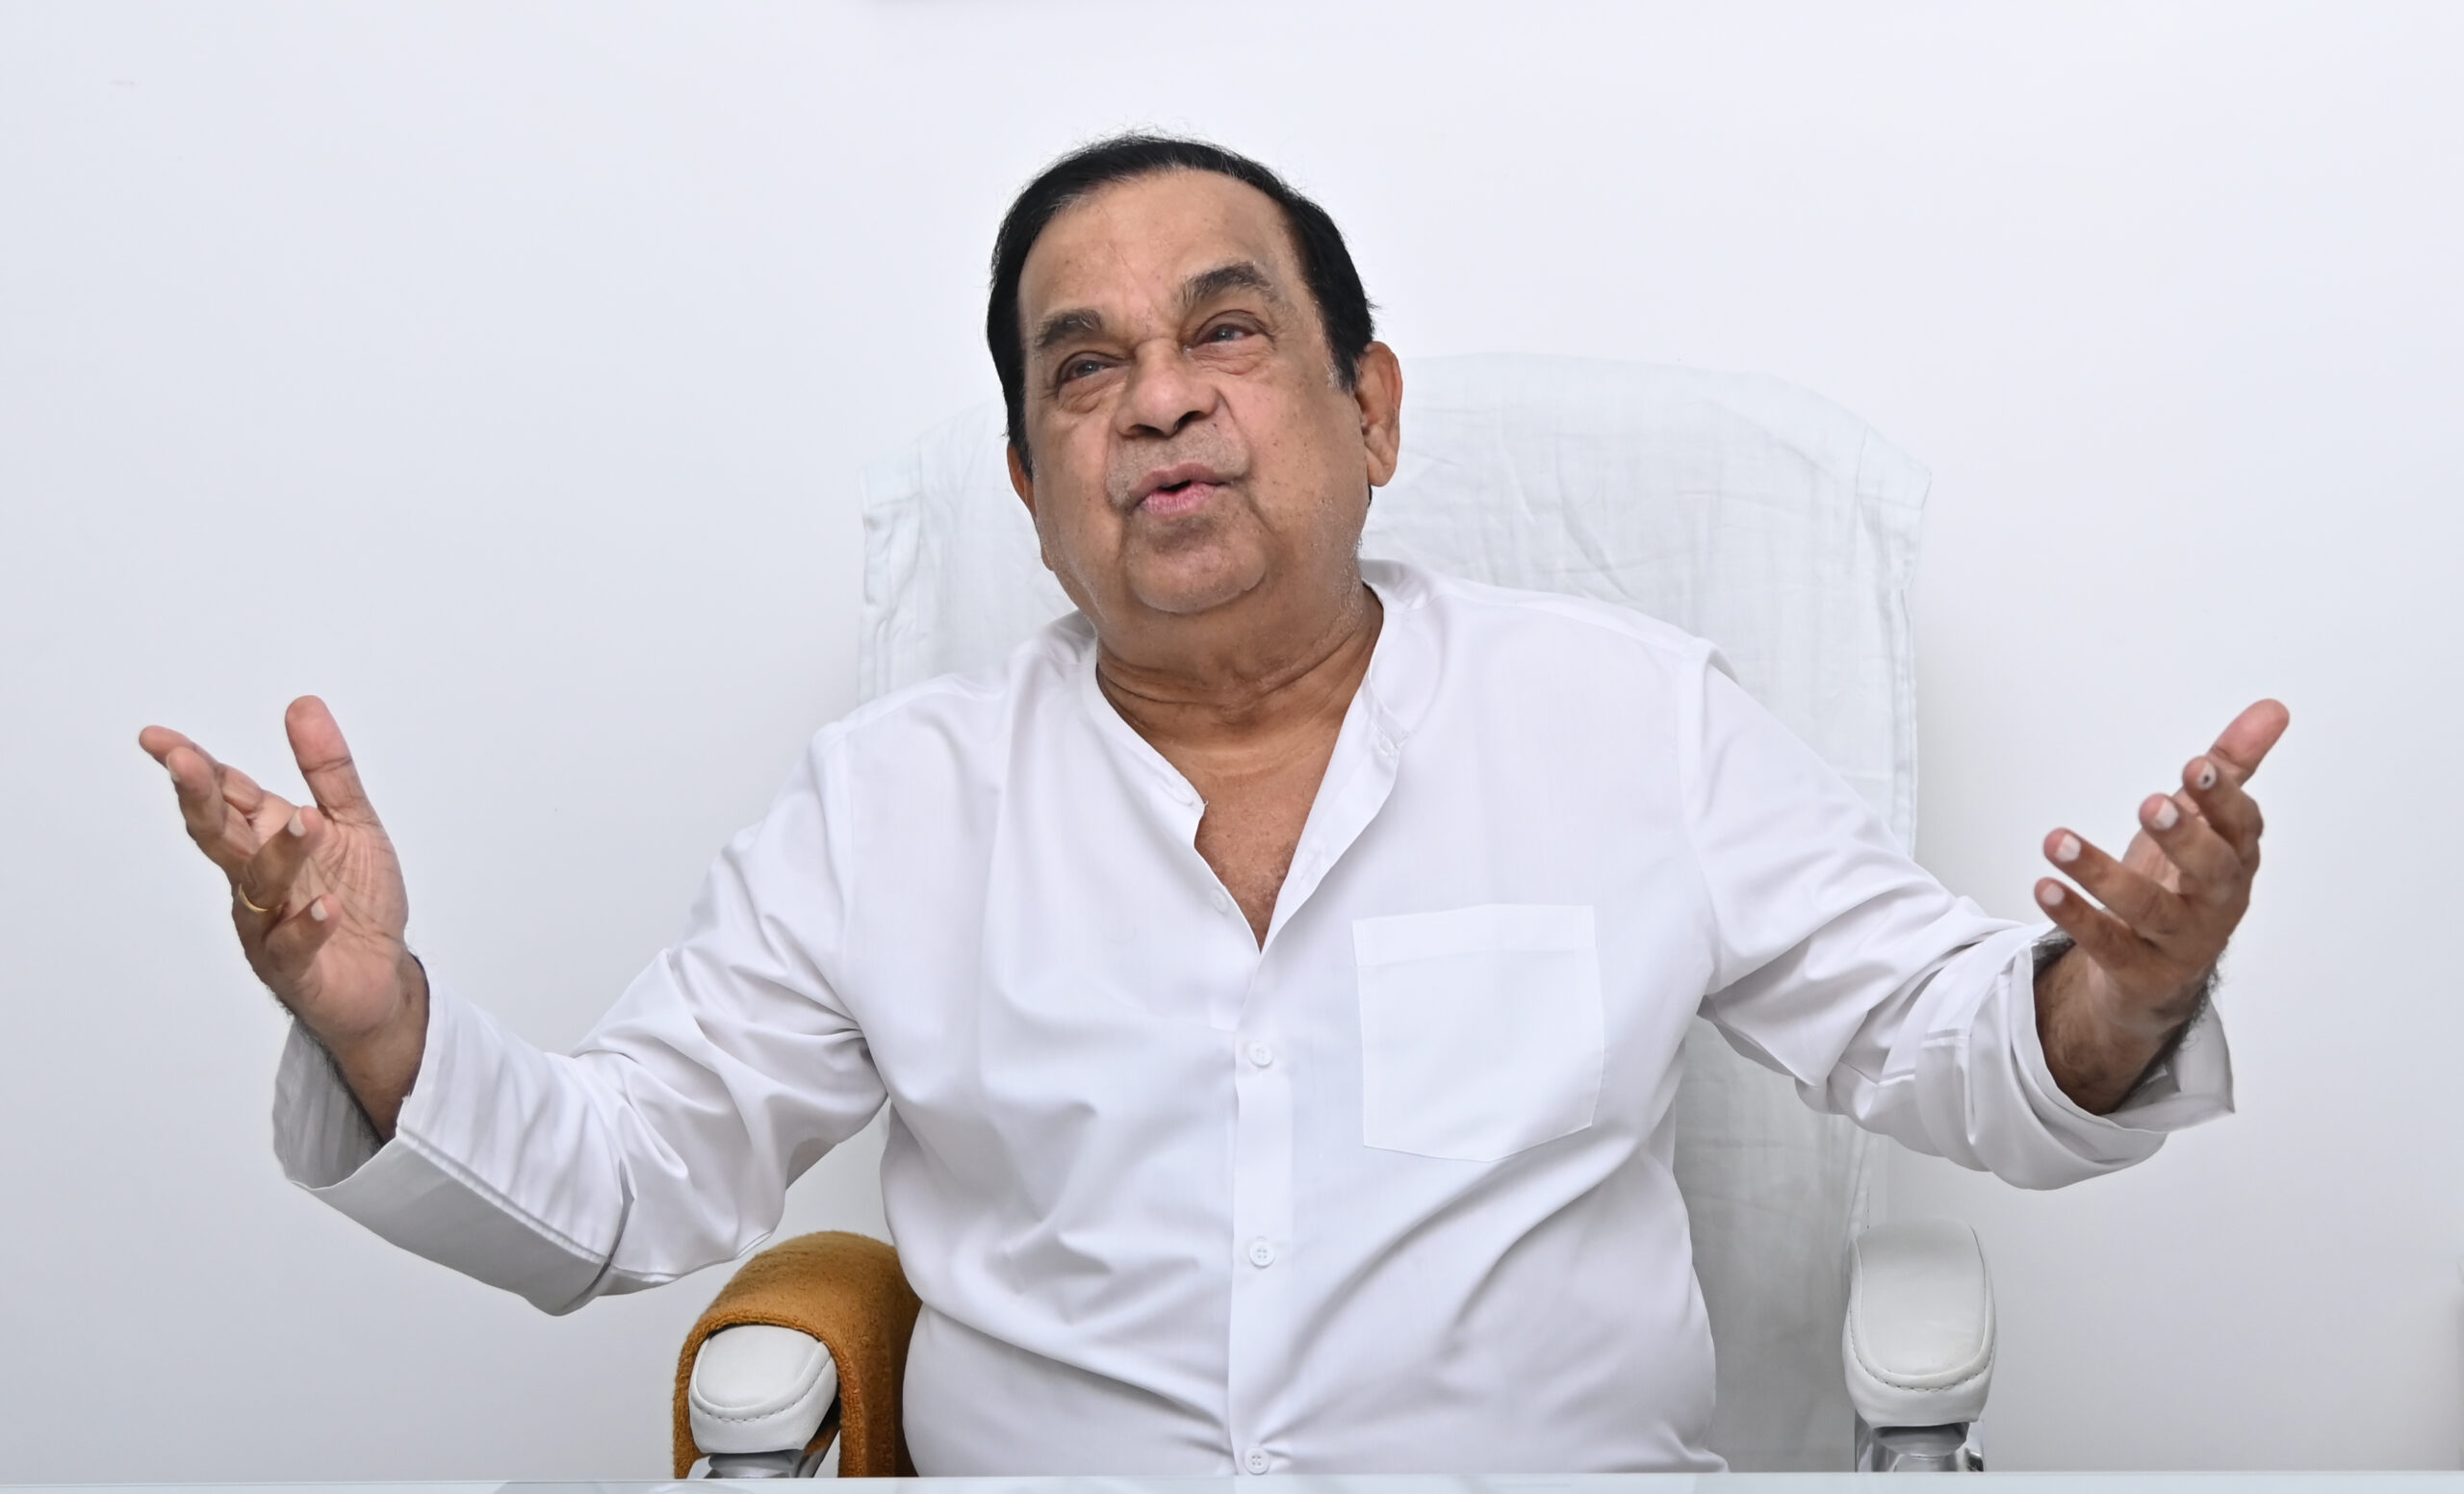 Tollywood Actor Brahmanandam Interview Photos